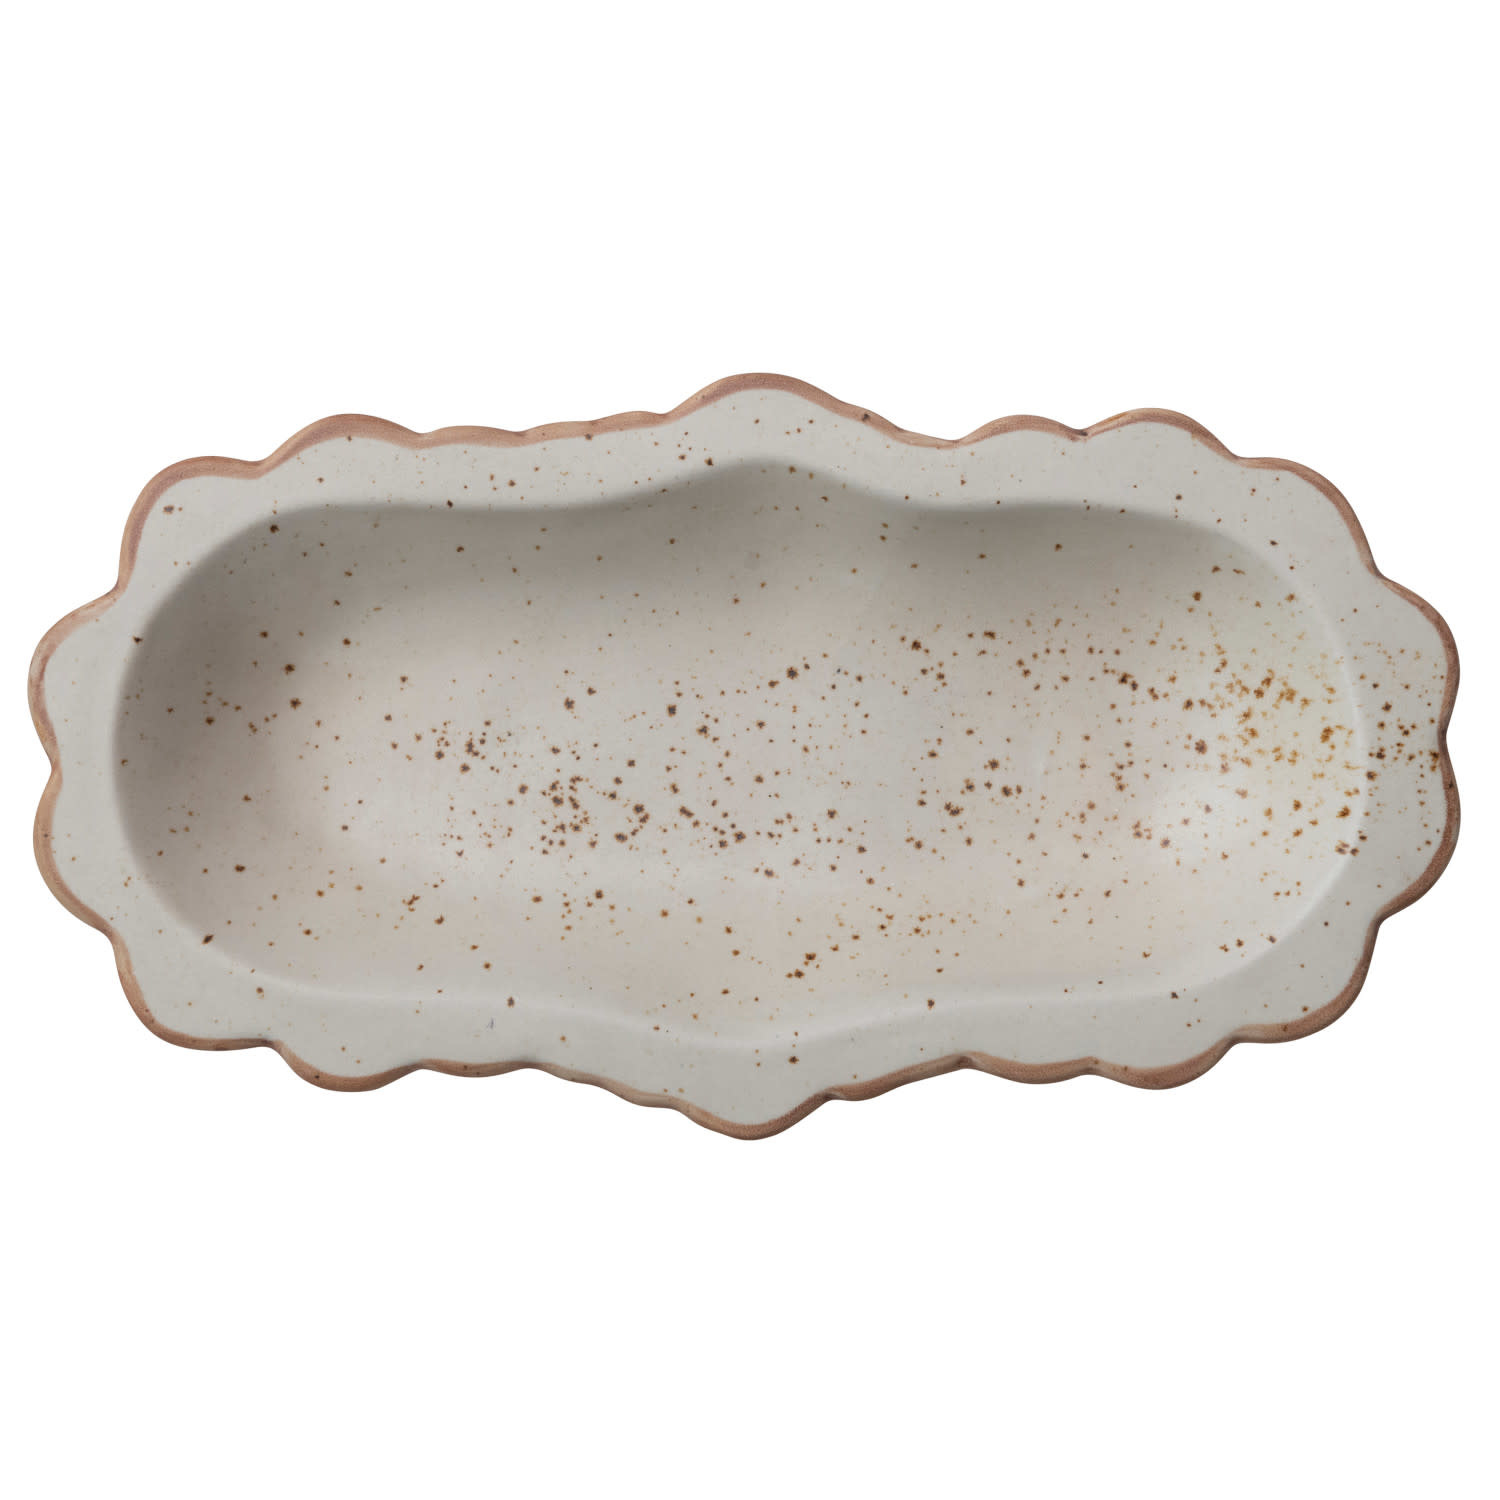 Stoneware Scalloped Platter/Bowl, Cream Speckled Finish, Available for local pick up